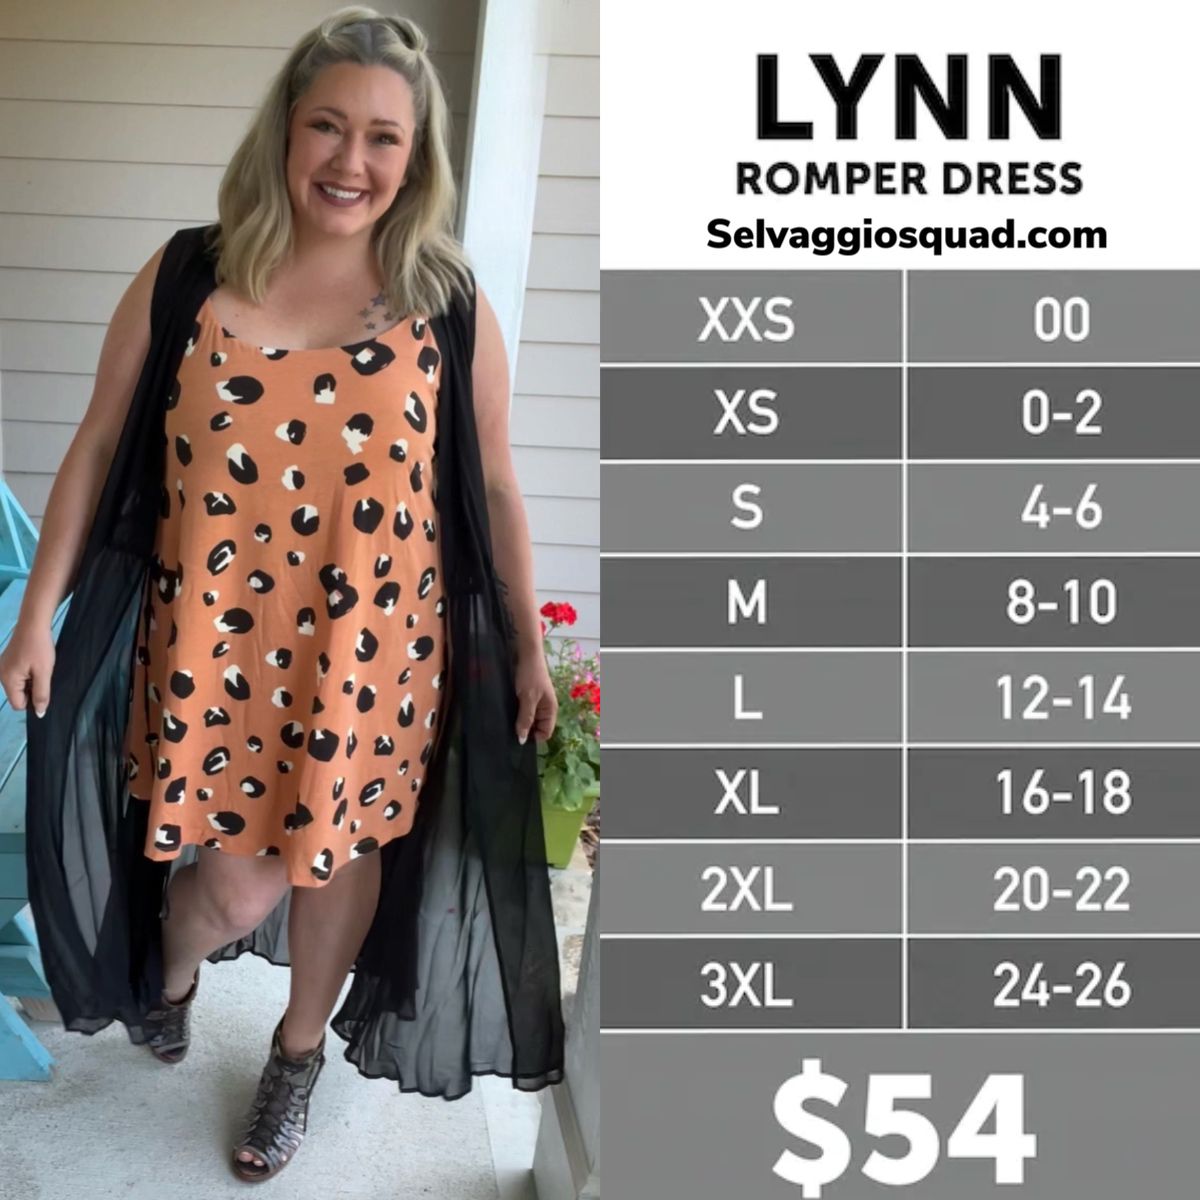 LuLaRoe Dresses: An Introduction To Their Clothes, Review And Suggestions  For Styling